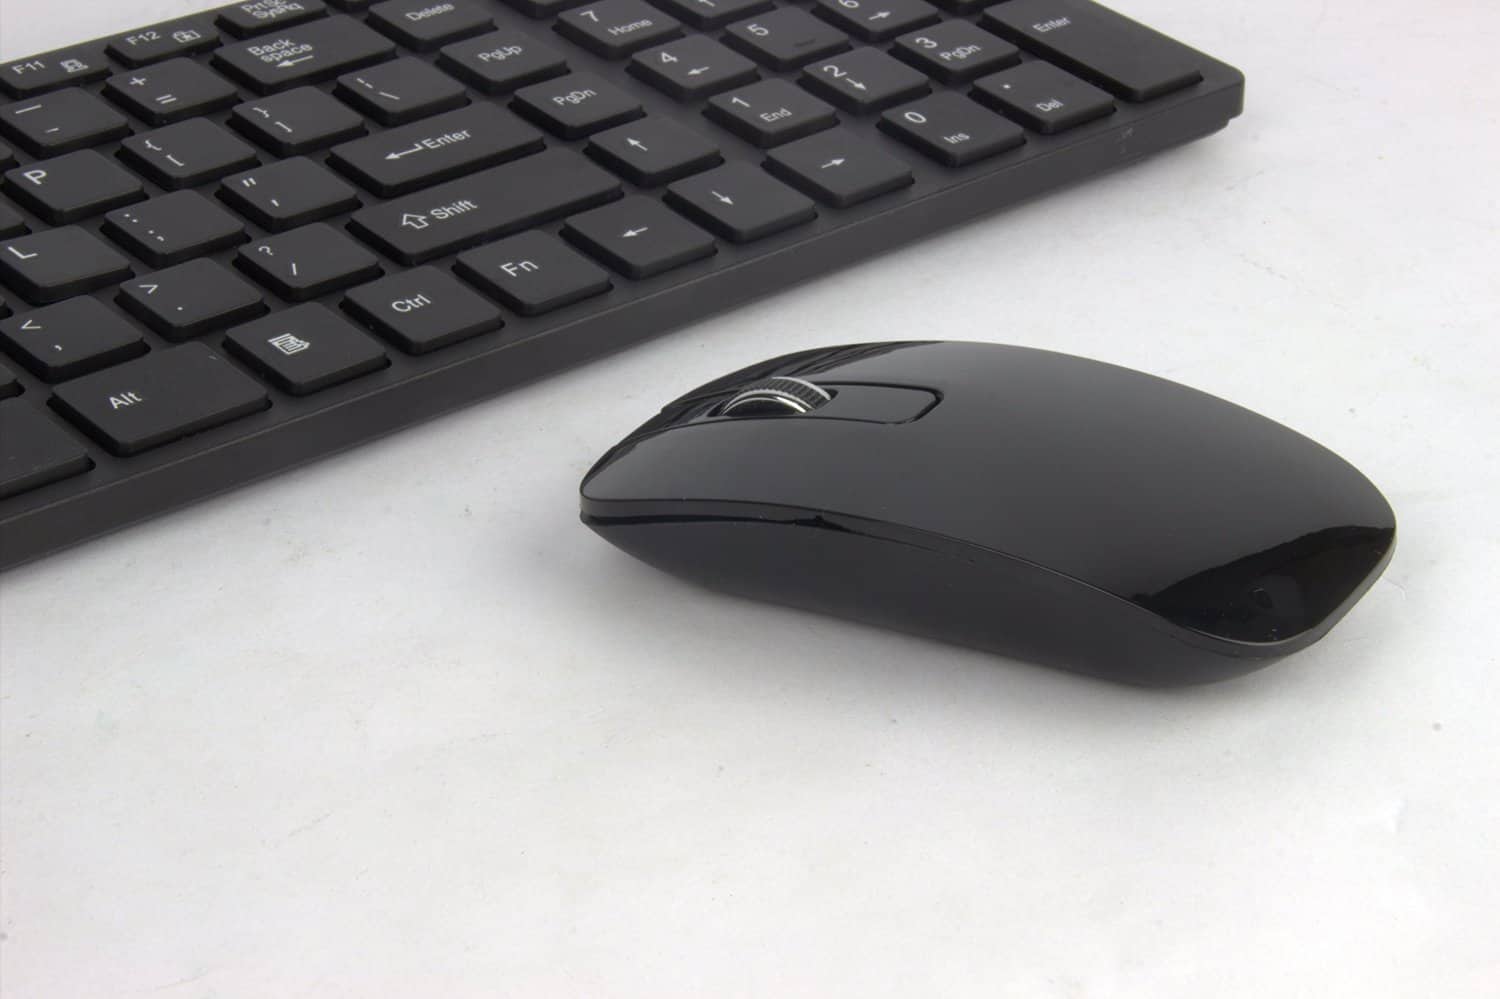 Bluefinger Keyboard and Mouse